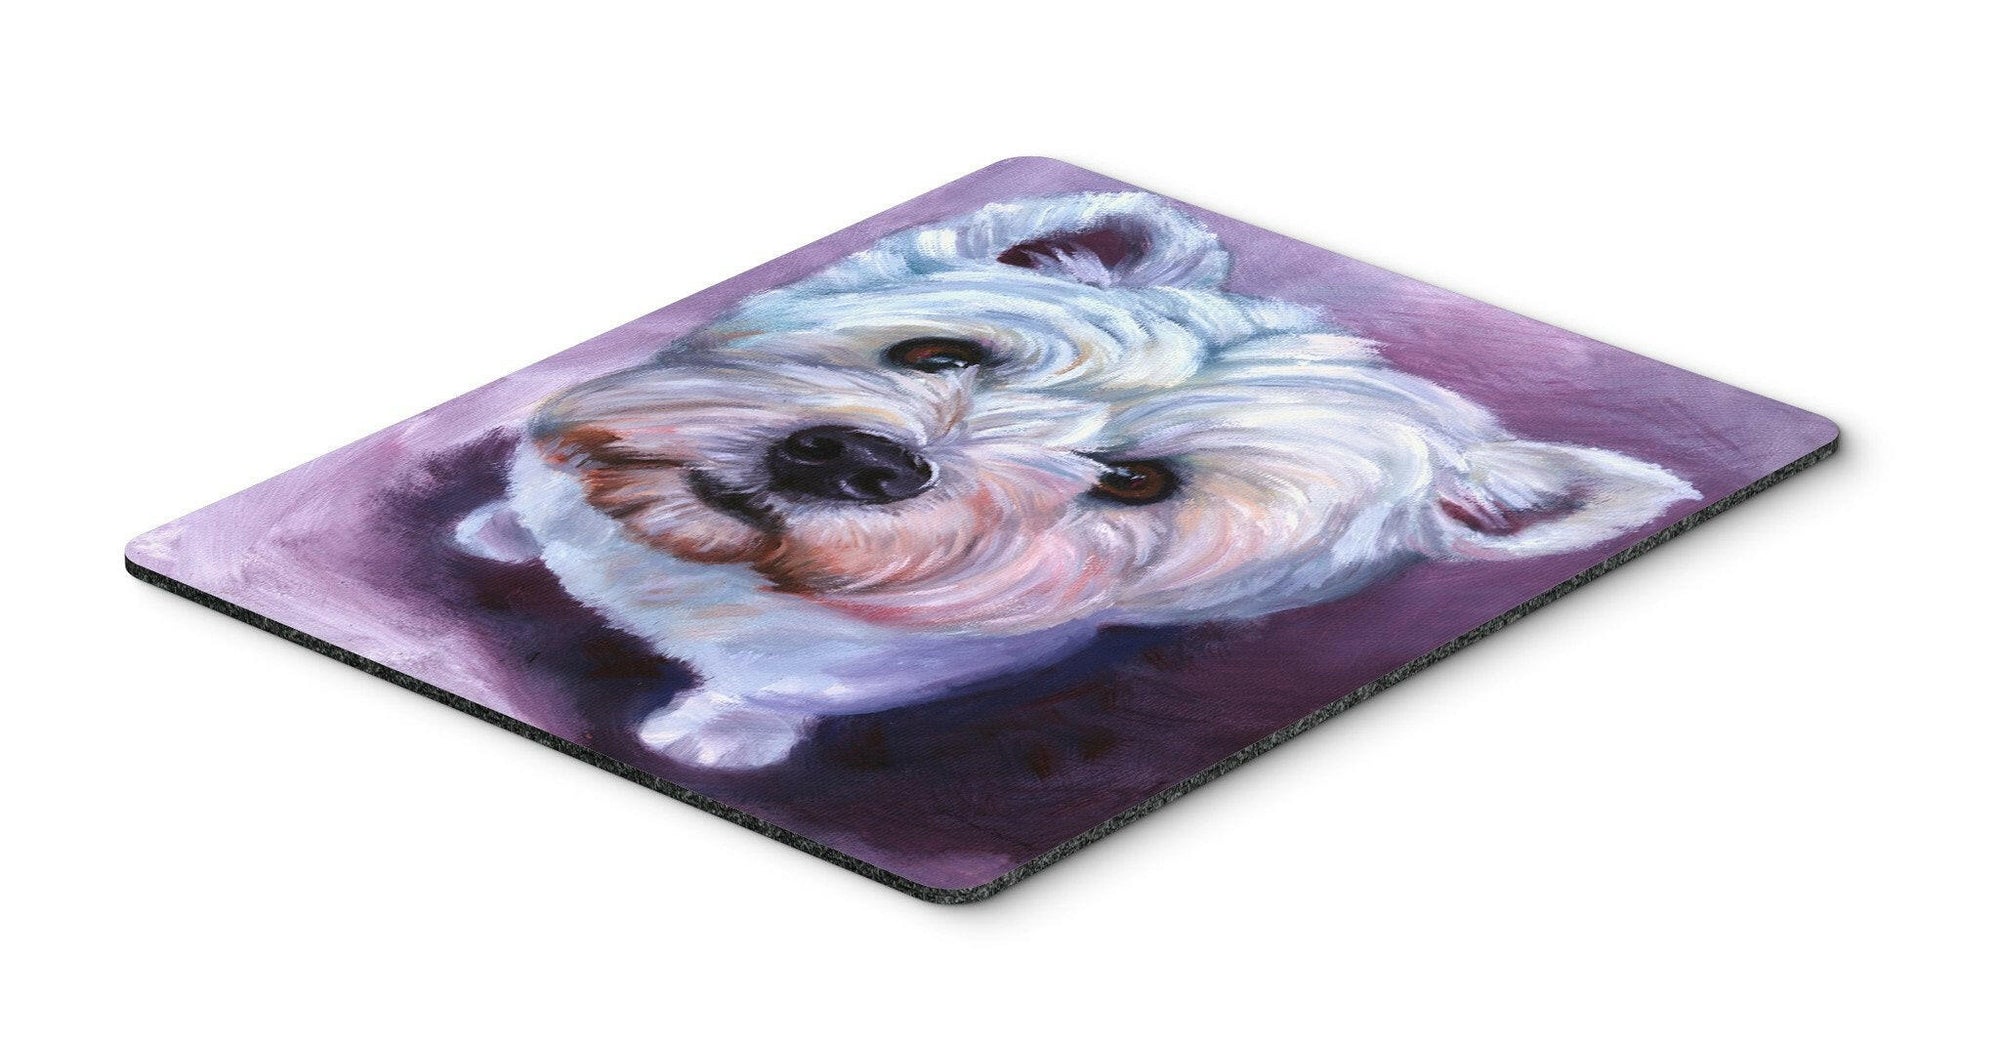 Whatsup Westie Mouse Pad, Hot Pad or Trivet 7400MP by Caroline's Treasures